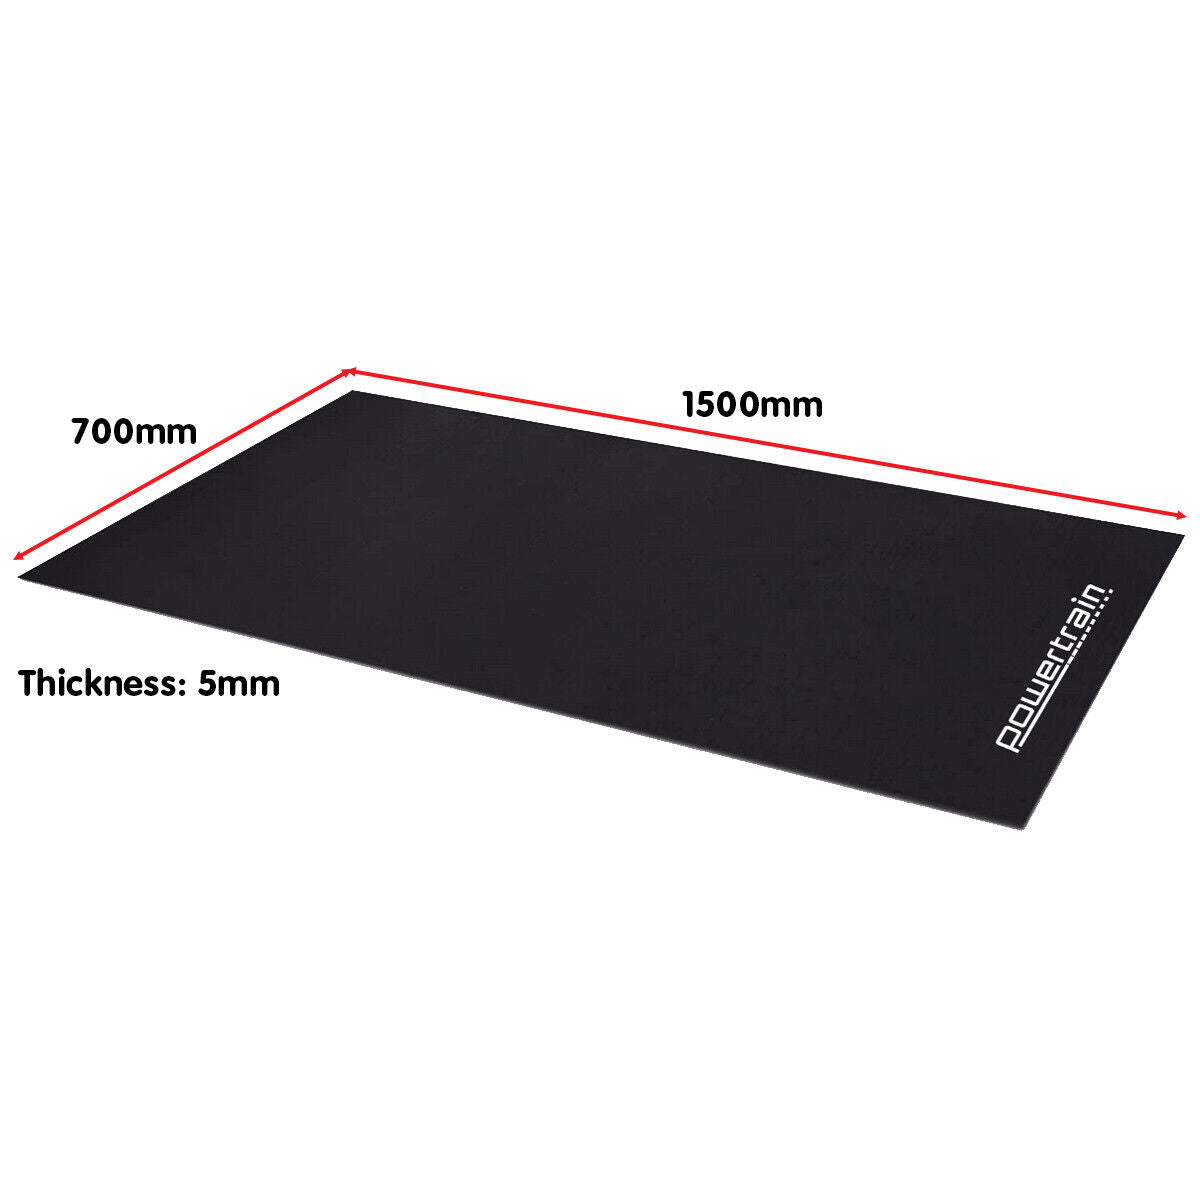 1.5m Fitness Gym Floor Protector Black Exercise Equipment Mat Home